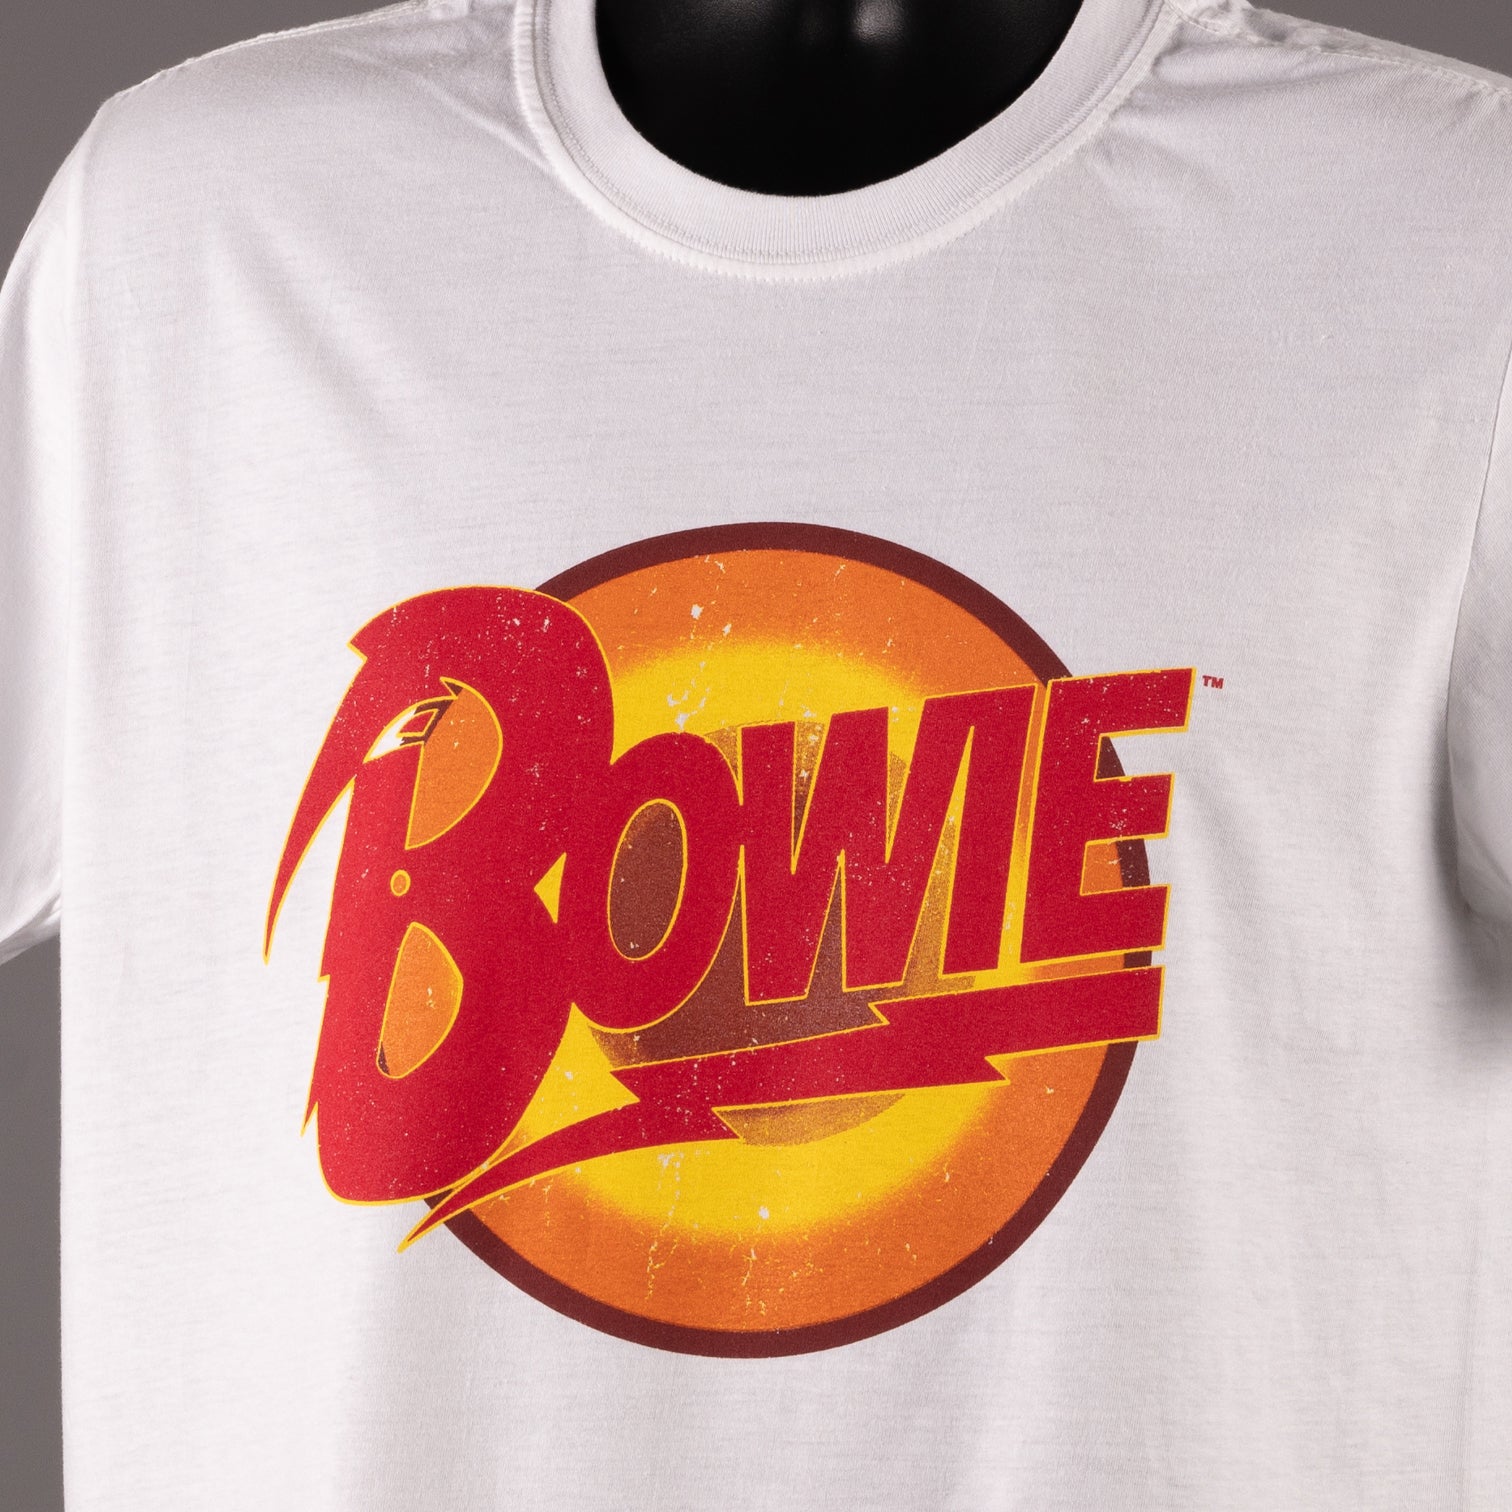 Bowie - Diamond Dogs T Shirt - White - End Of Line